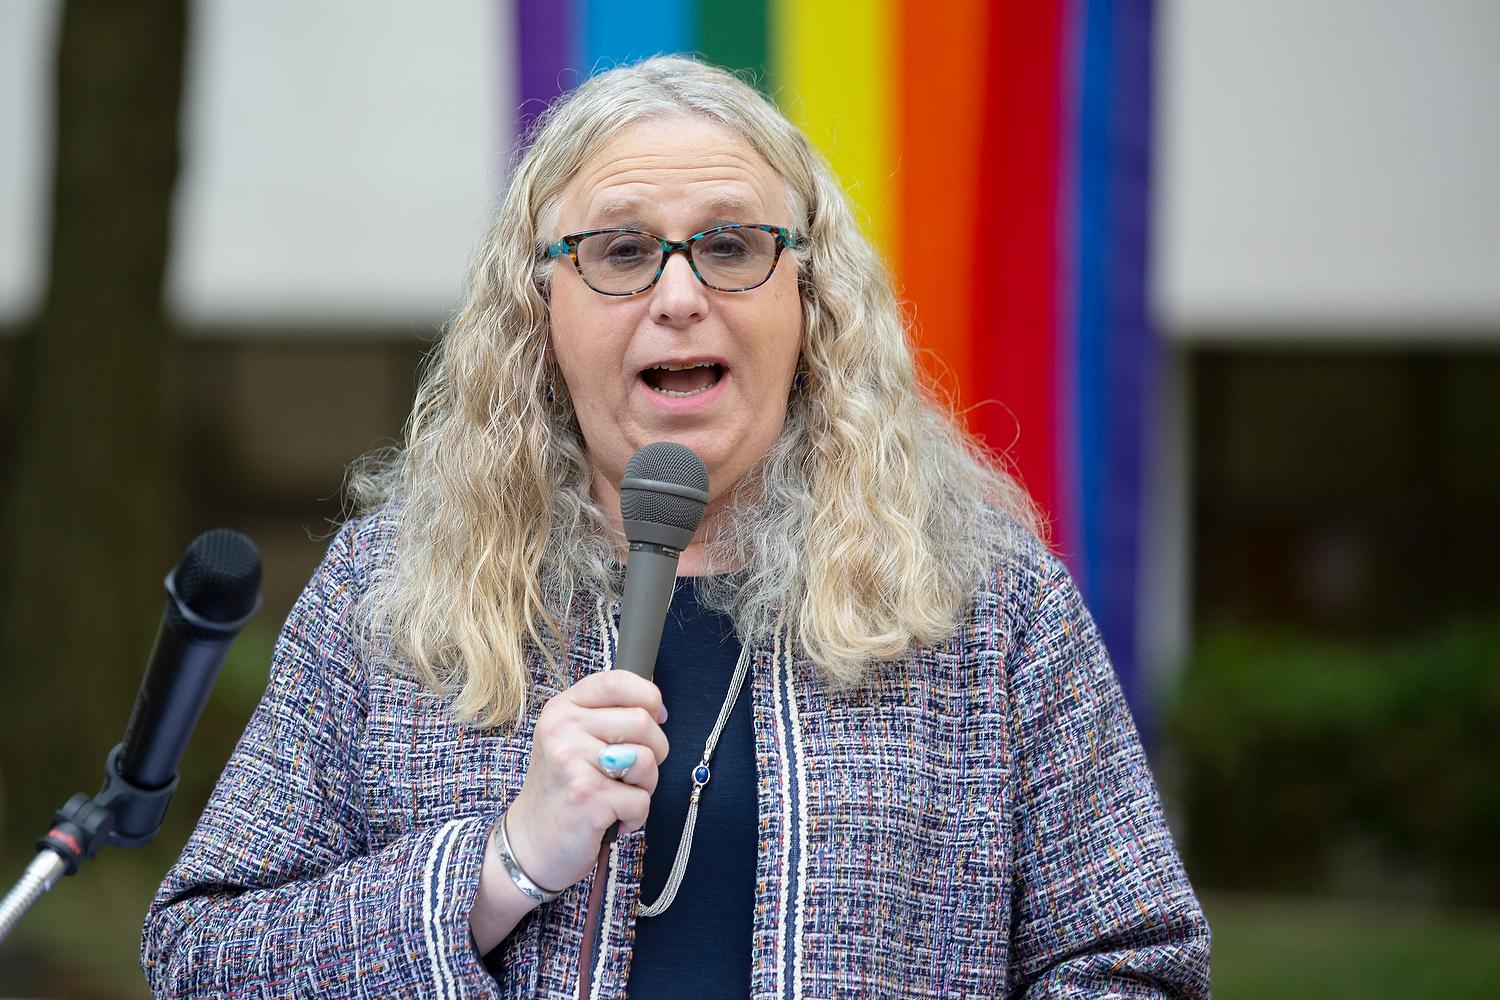 Rachel Levine speaks into a microphone. Behind her, a rainbow-colored flag is draped.